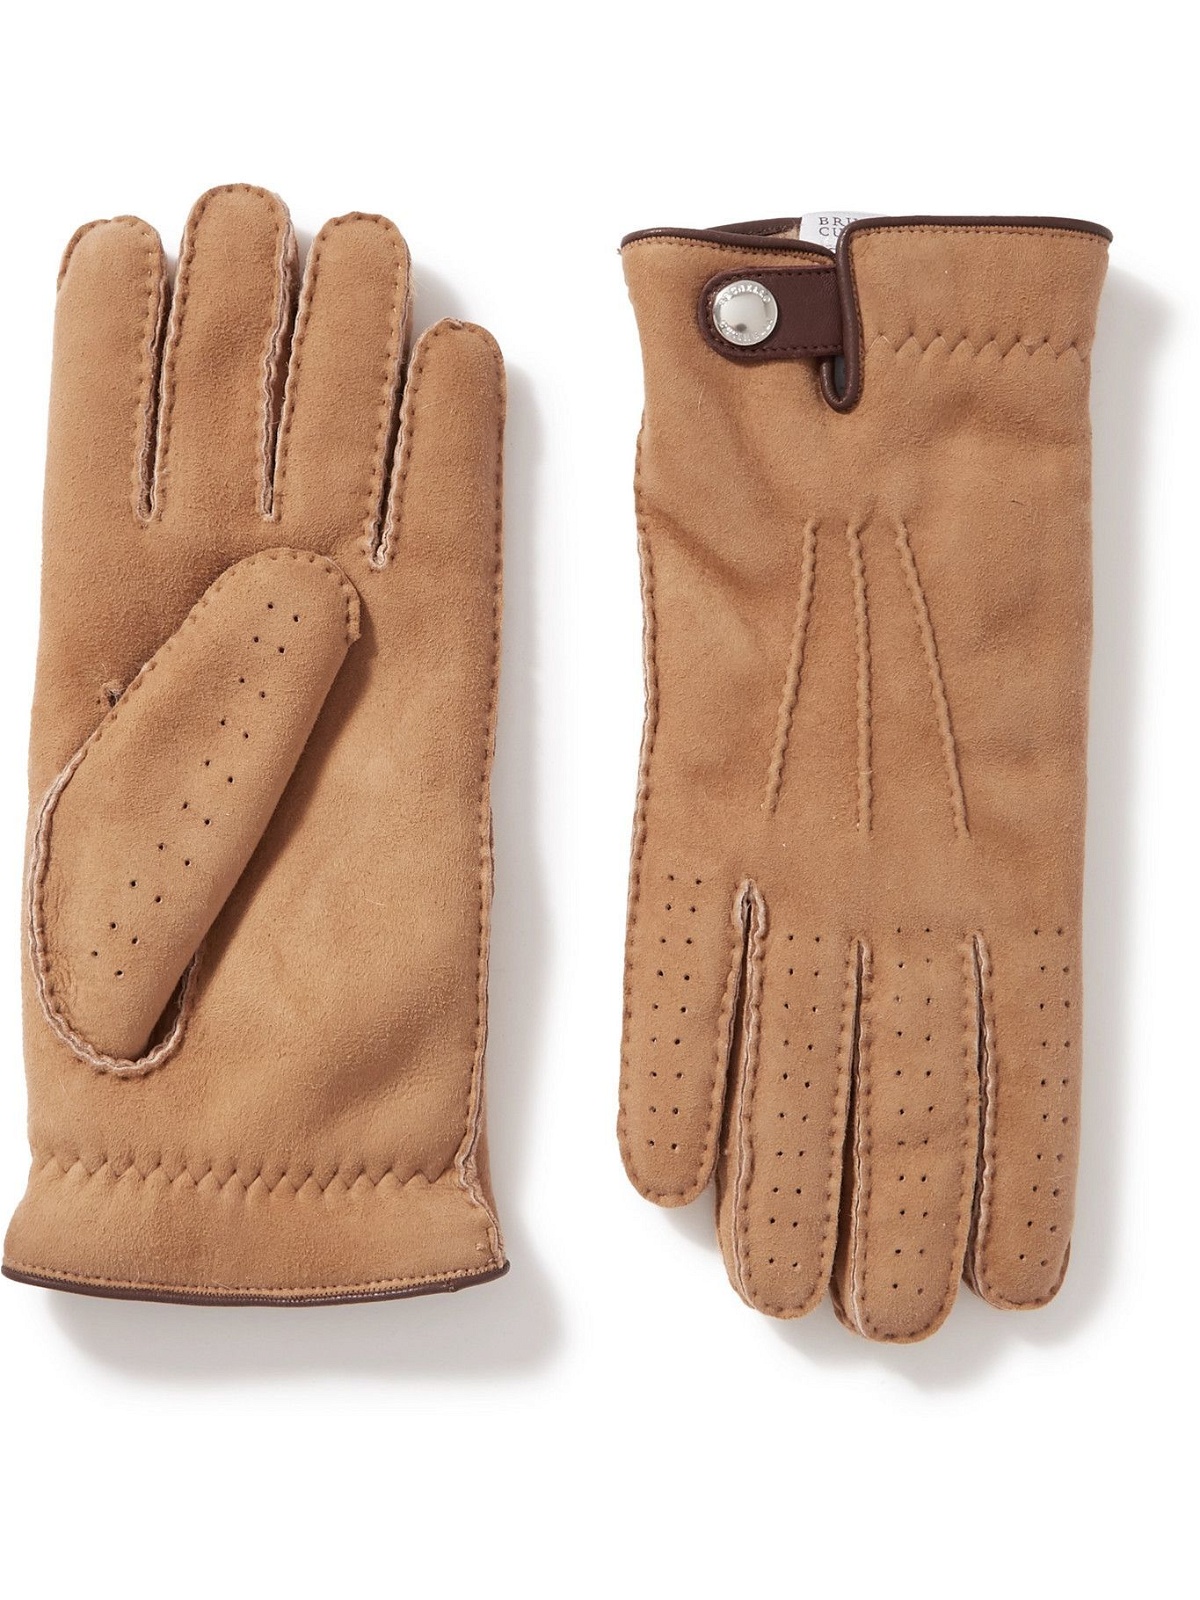 Photo: BRUNELLO CUCINELLI - Shearling-Lined Perforated Suede Gloves - Brown